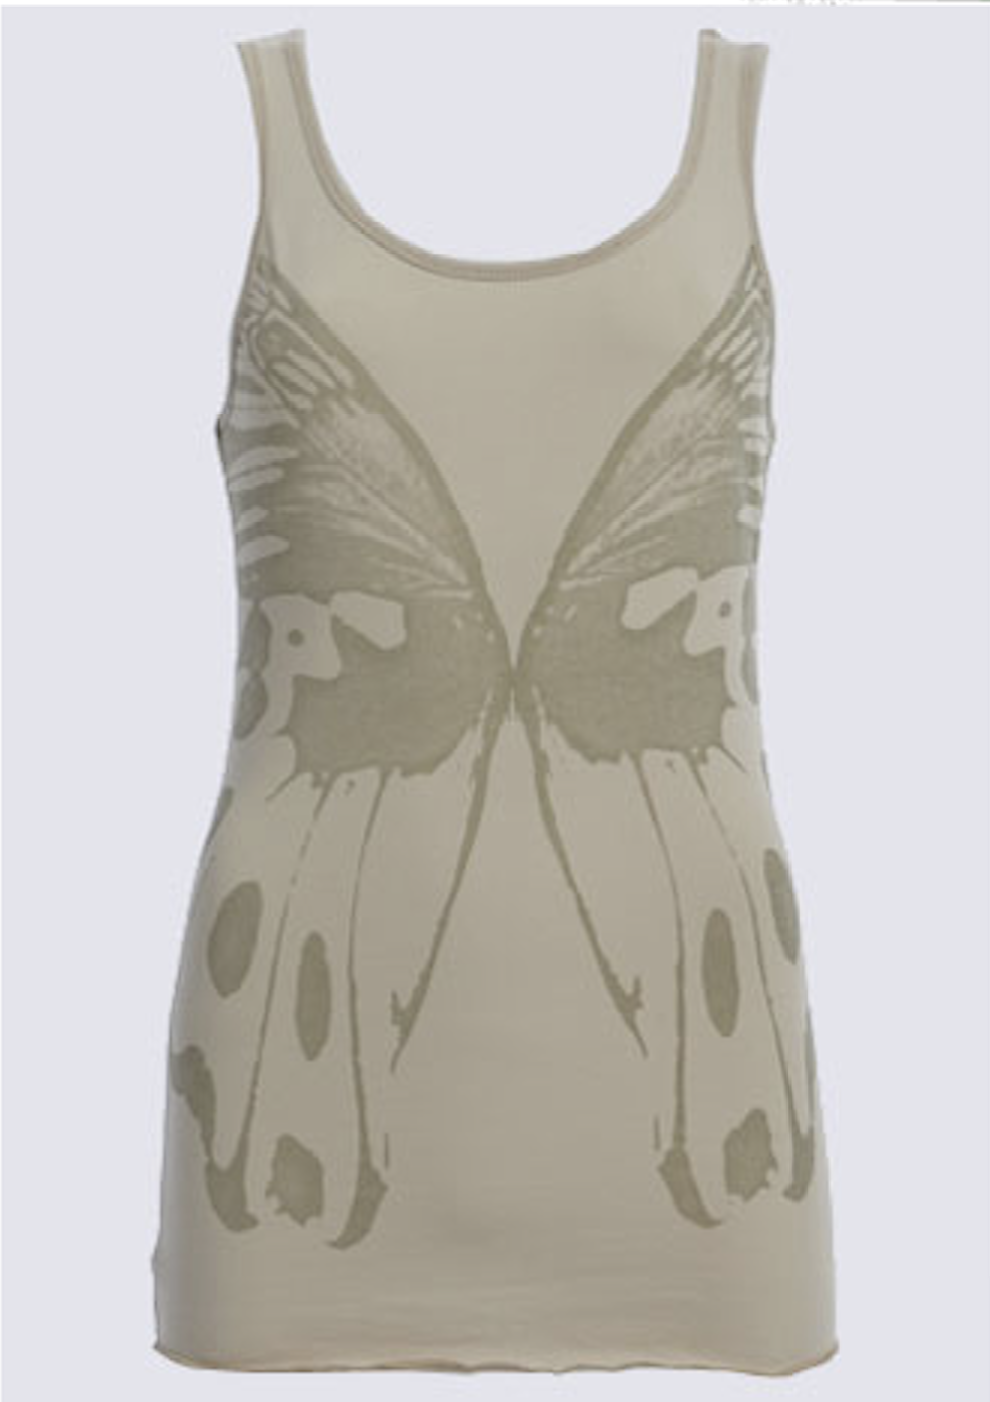 Itsus Vintage Tank Top "Wings" in Rattan (2009 Collection) - Email Us to Order